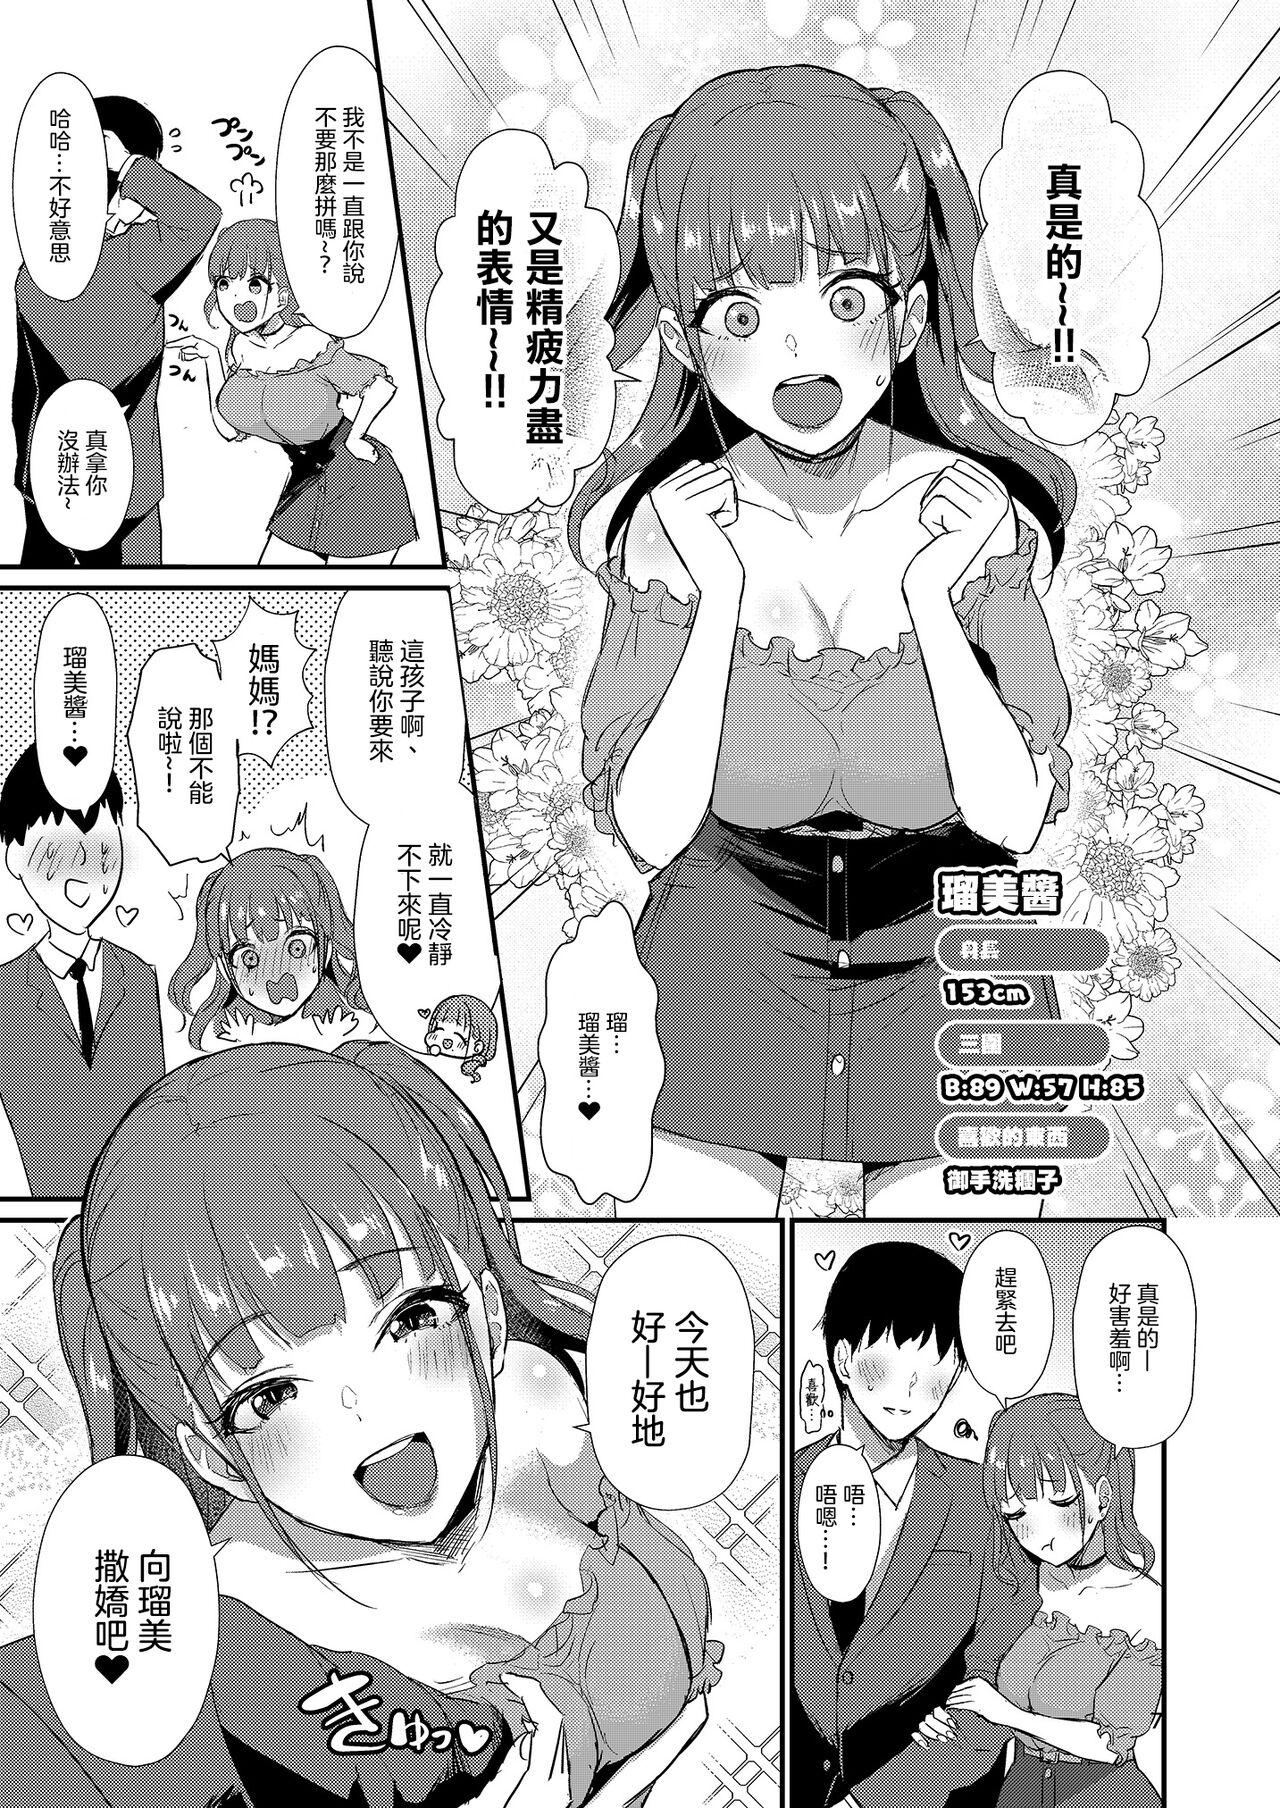 Girl Girl Homehome Home e Youkoso! - Welcome to Home Home Home! | 歡迎來到誇誇屋！ Gay Physicals - Page 8